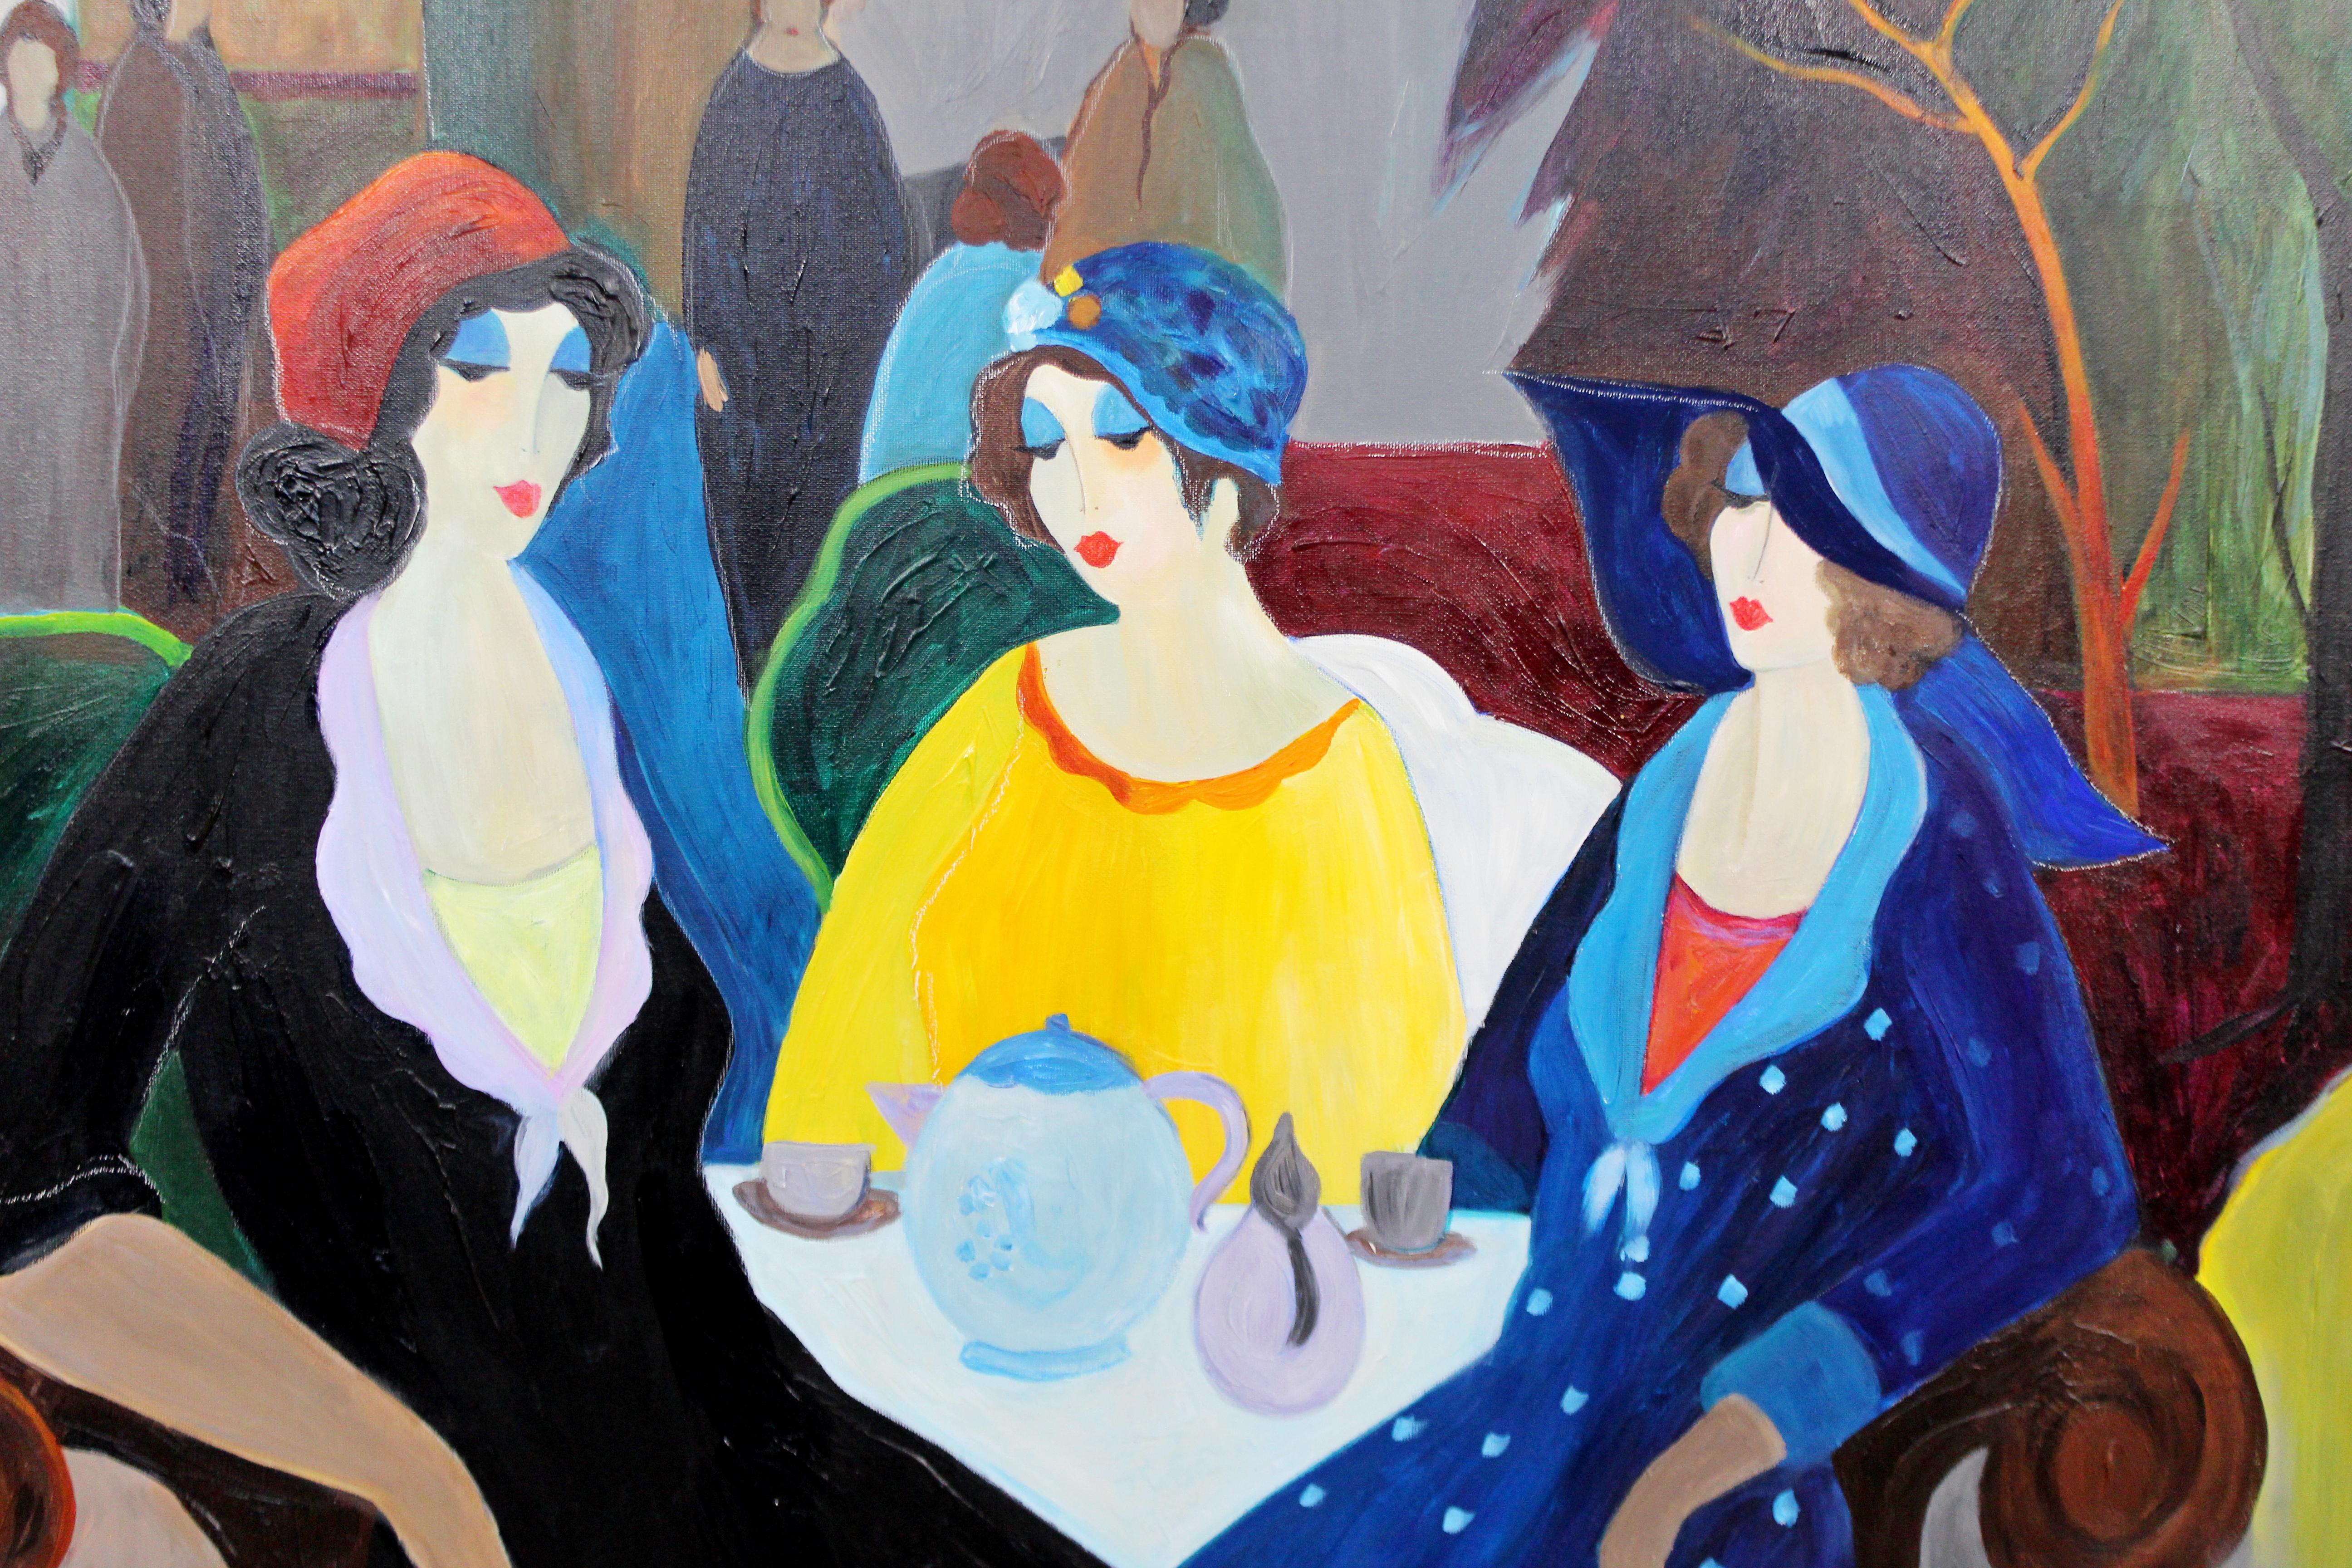 For your consideration is a magnificent, large unique acrylic on canvas painting, signed by artist in gold frame.  Itzchak Tarkay is considered to be a key figure in the modern figurative movement.  Artwork by the Israeli artist are easily